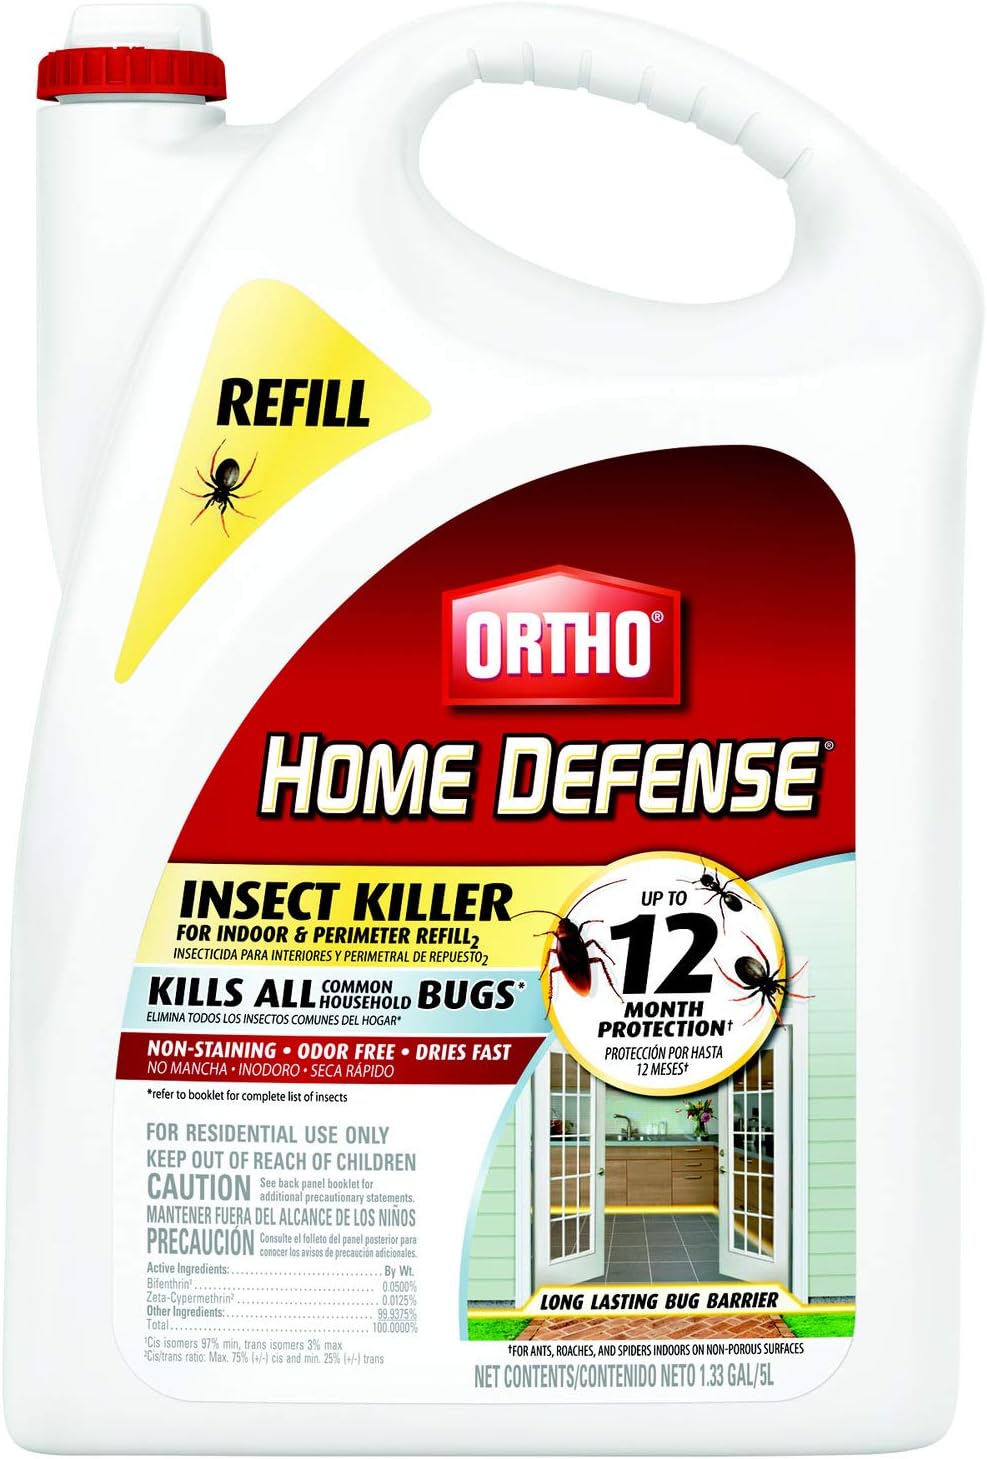 Ortho Home Defense Insect Killer for Indoor & [...]